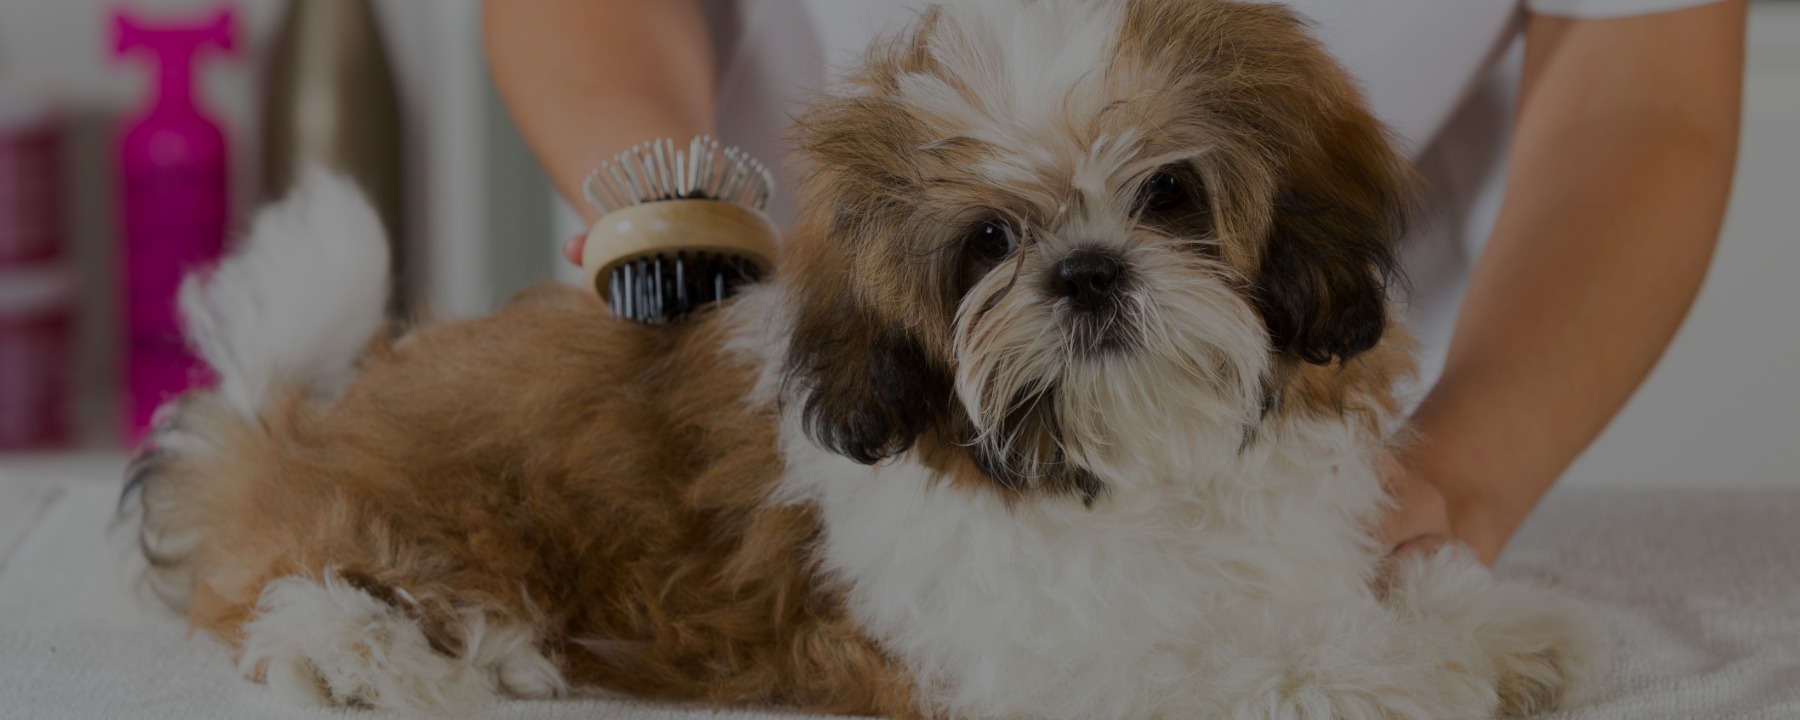 6 Dog Grooming Career Benefits You Might Not Know About